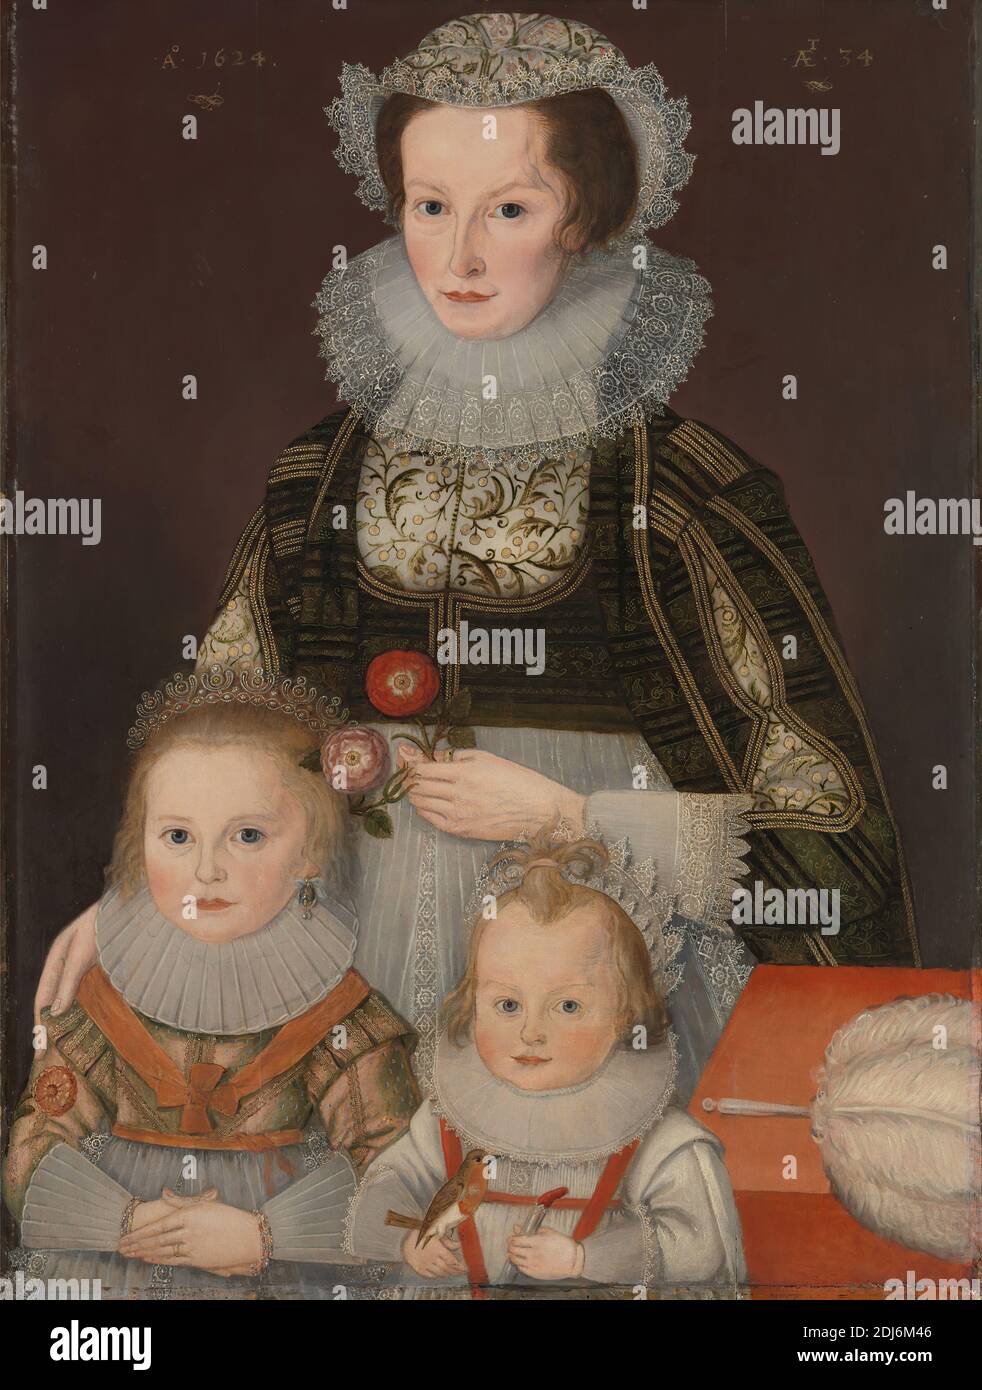 A Lady and Her Two Children, unknown artist, seventeenth century, 1624, Oil on panel, Support (PTG): 35 3/4 x 27 inches (90.8 x 68.6 cm), background, bird, black, children, collars, coral, costume, crown, earrings, European Robin, family, feather, flowers (plants), gold, headdress, Jacobean, lace, orange, pink (color), portrait, red, toys (recreational artifacts), Tudor, white (color), woman Stock Photo